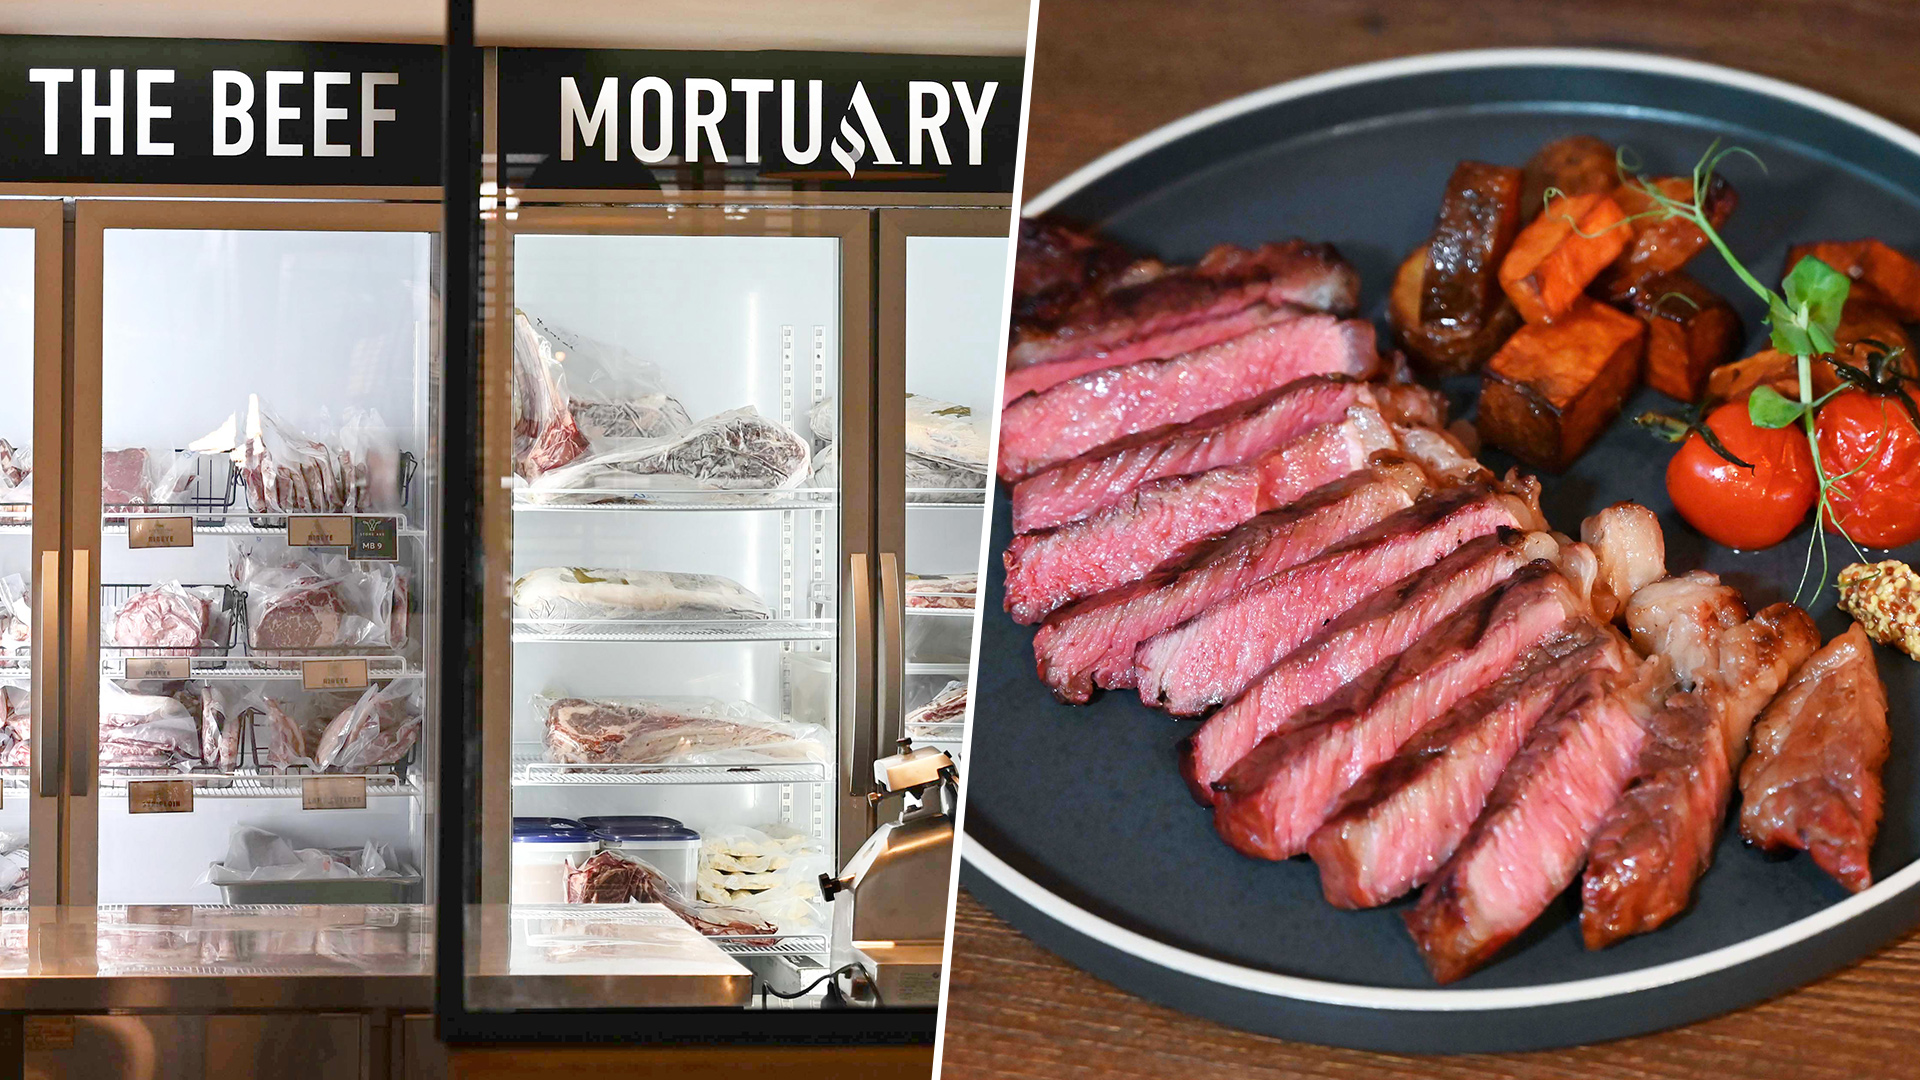 This Steakhouse At Telok Ayer Has A 'Beef Mortuary' - Clever Or Creepy? -  8days